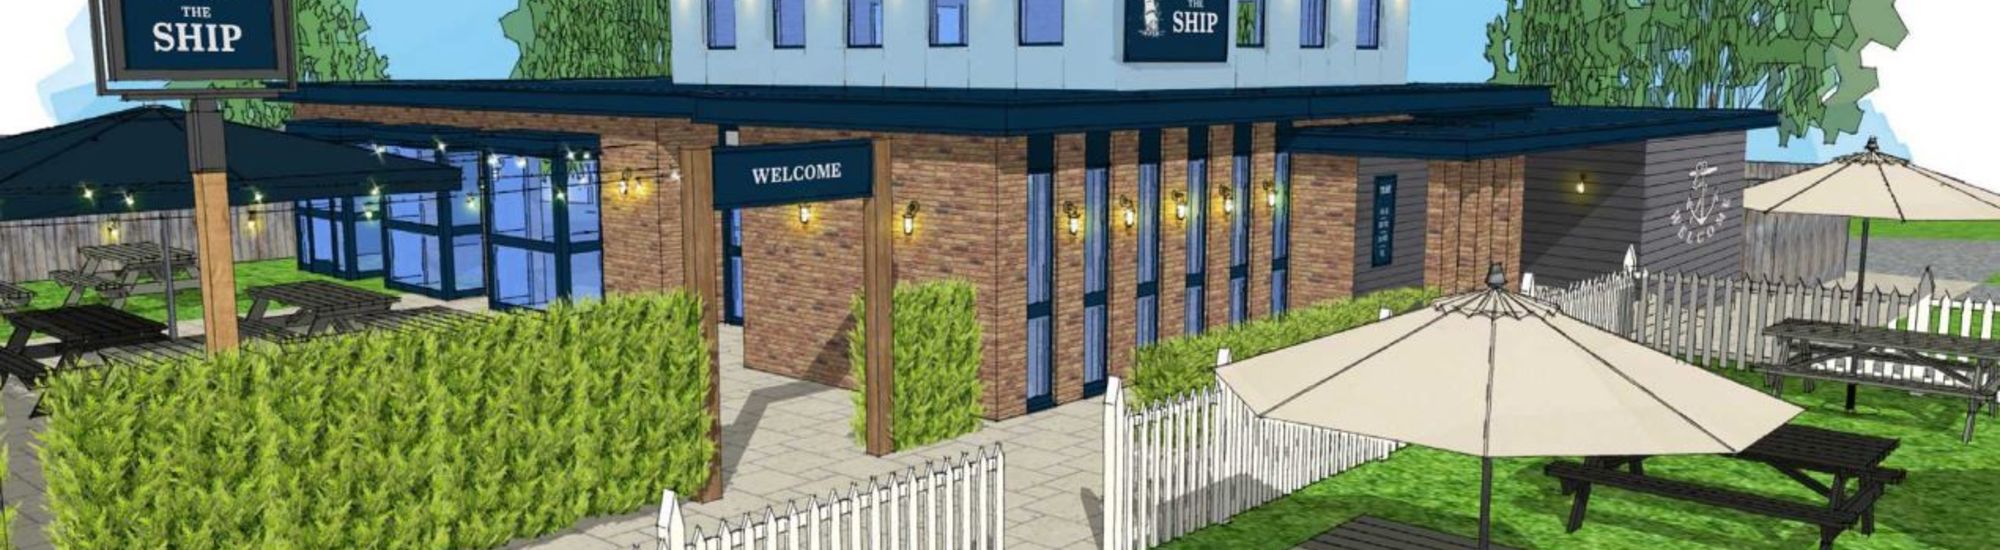 The Ship, Cambridge - Exciting Investment Planned